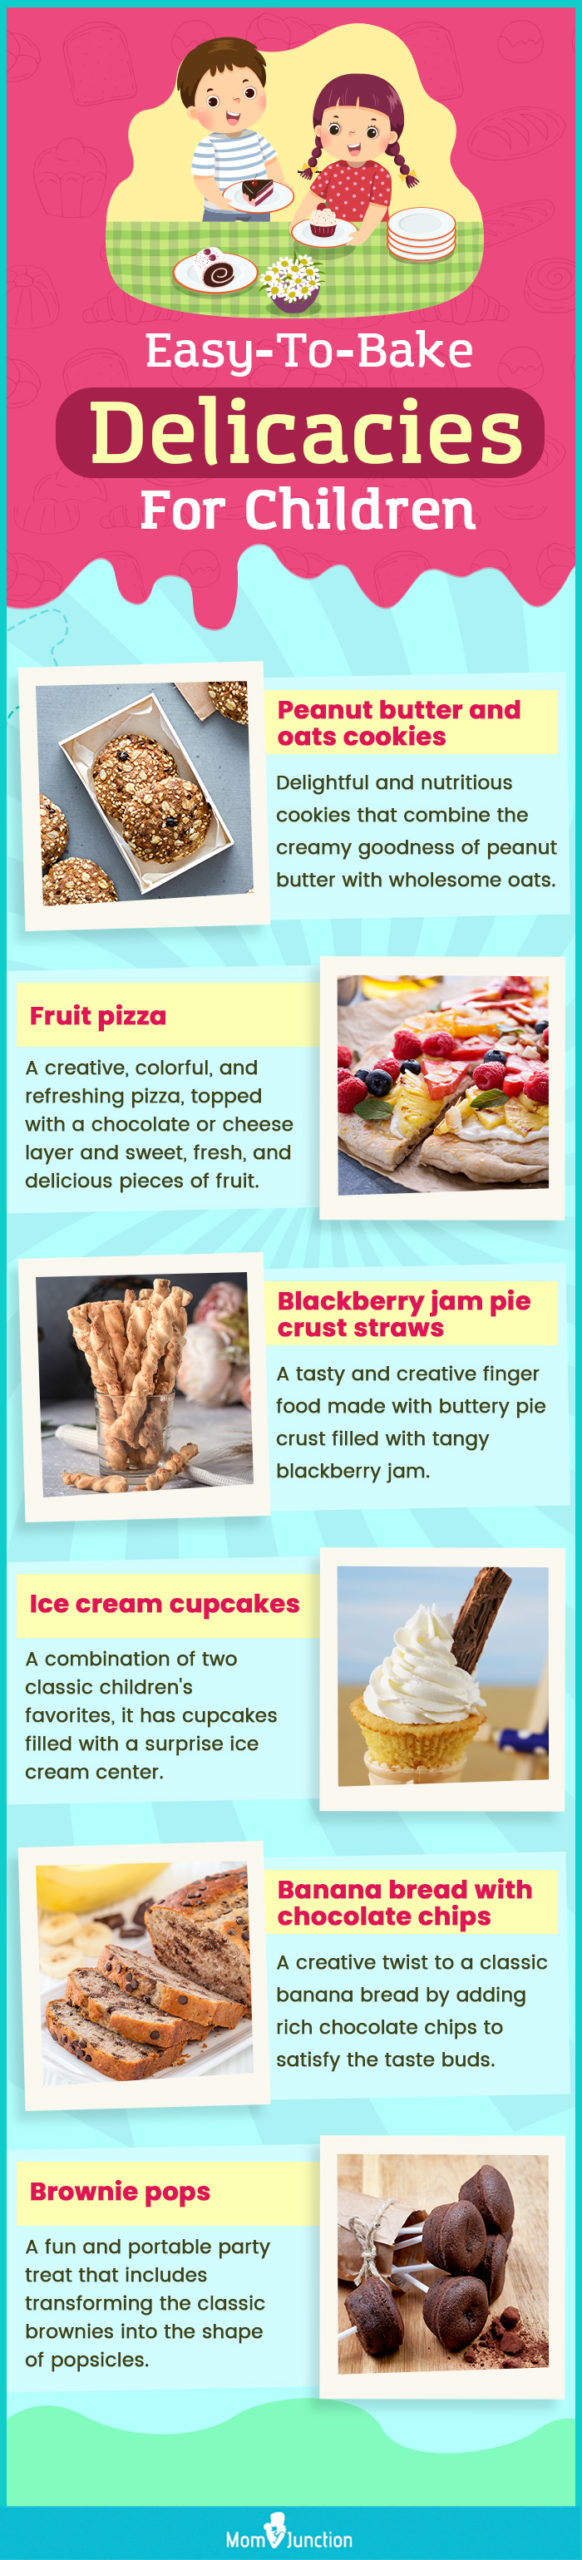 easy to bake delicacies for children(infographic)